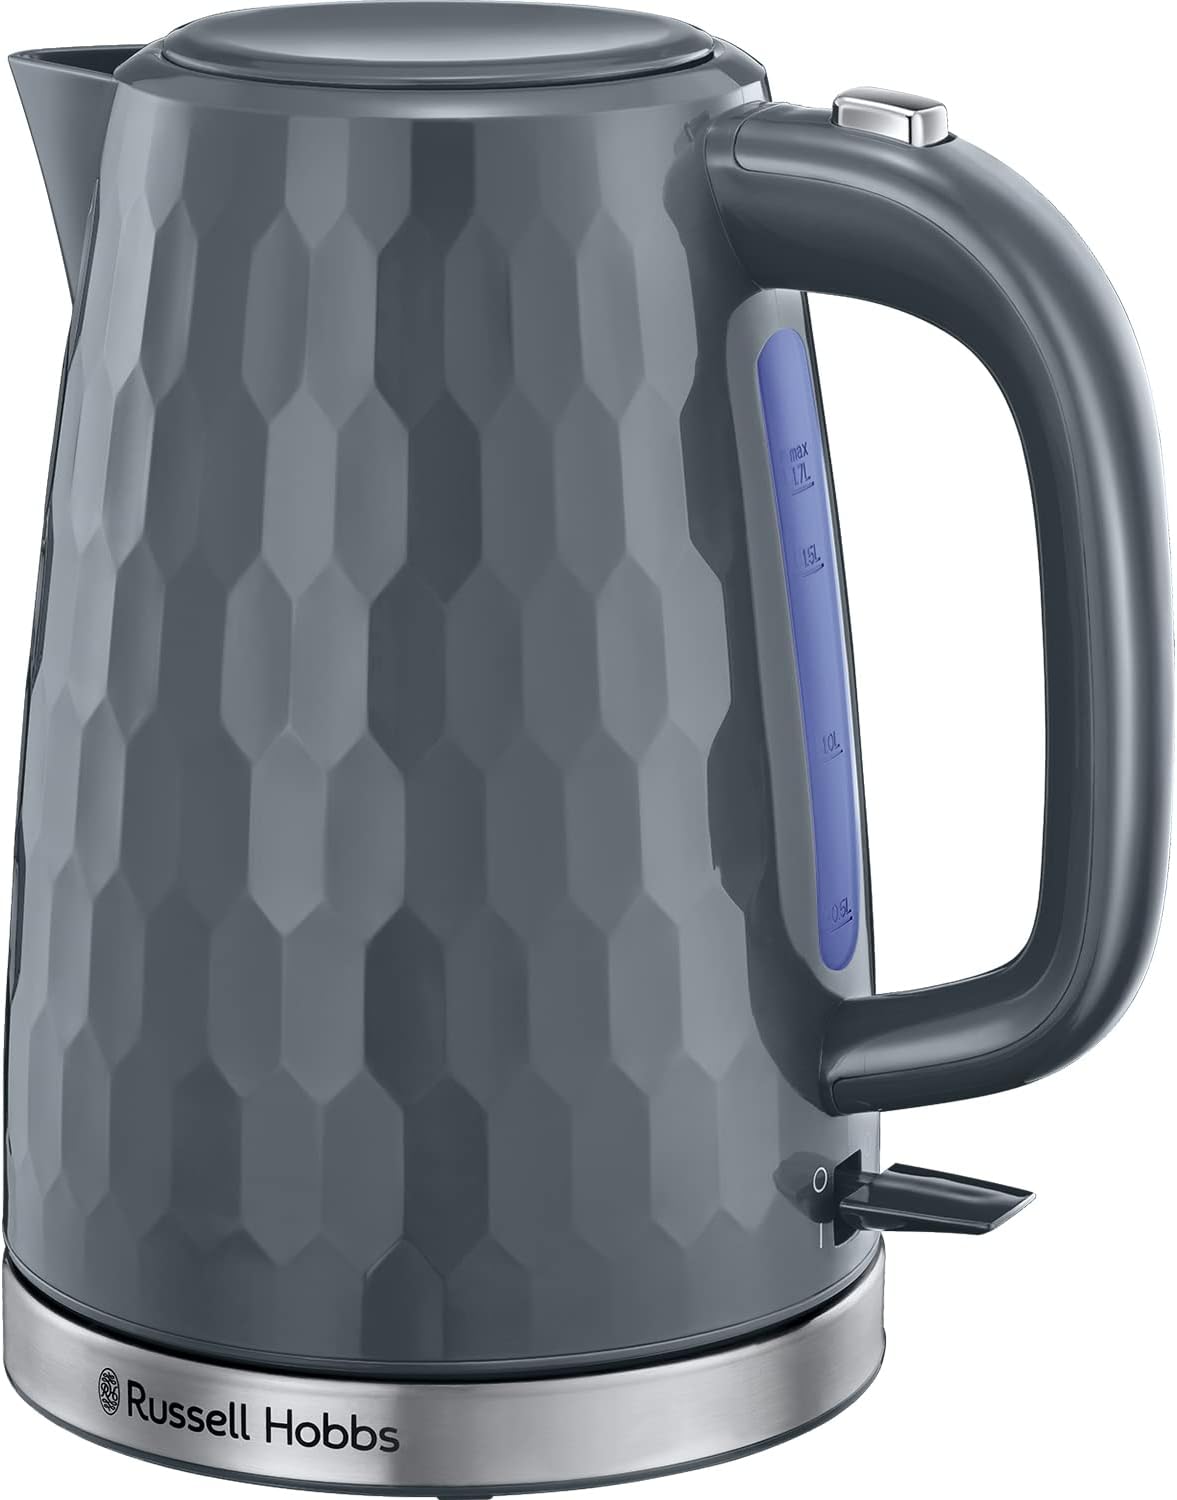 Russell Hobbs Honeycomb Electric 1.7L Cordless Kettle (Fast Boil 3KW, Grey premium plastic, matt & high gloss finish, Removable washable anti-scale filter, Push button lid, Perfect pour spout) 26053